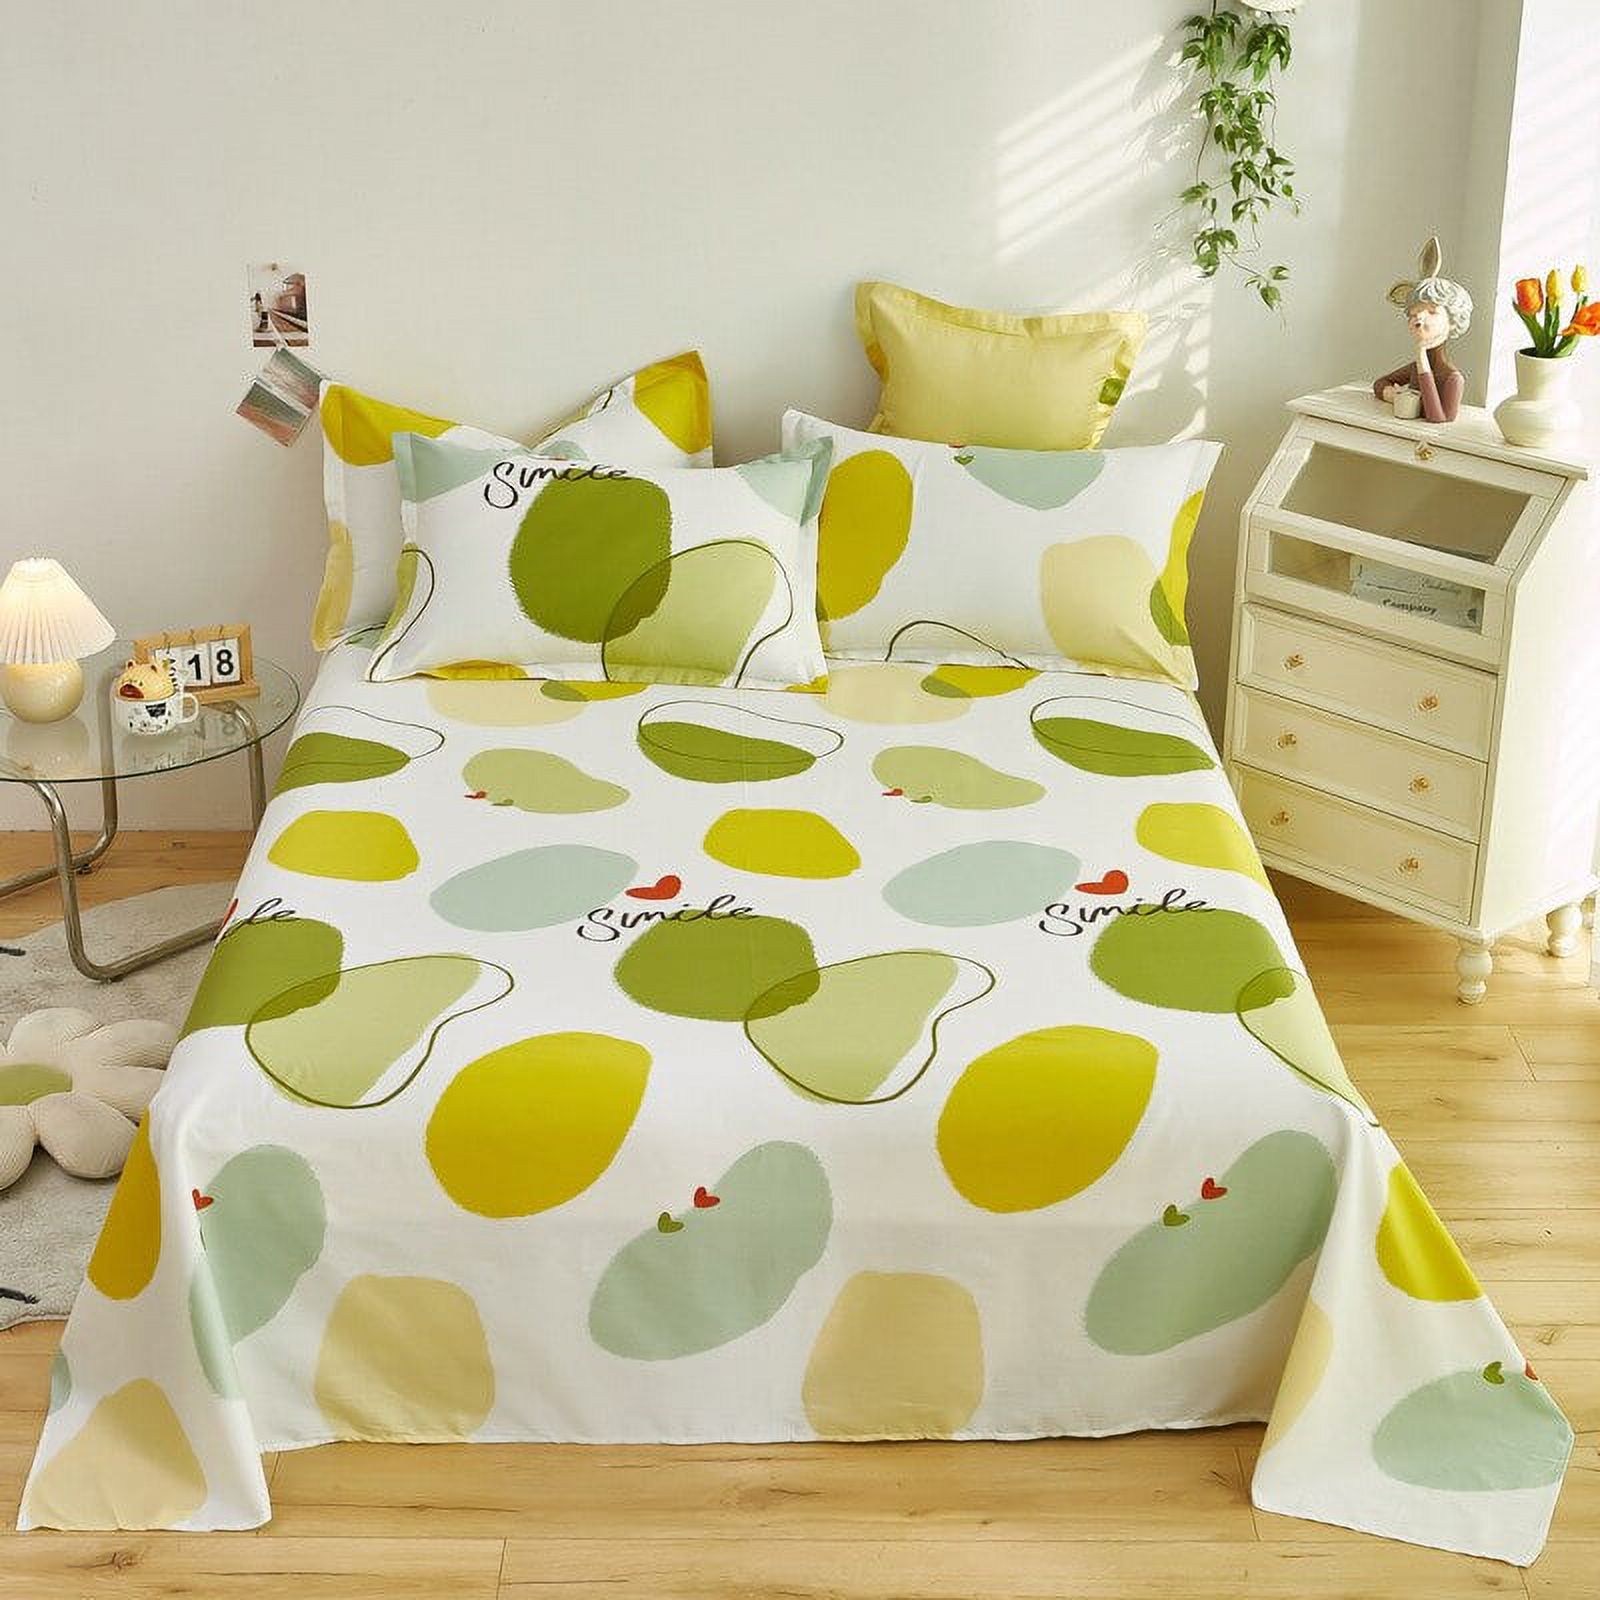 ACMDL Pure Cotton Flat Sheets for Bed Soft Skin-friendly Cartoon Print ...